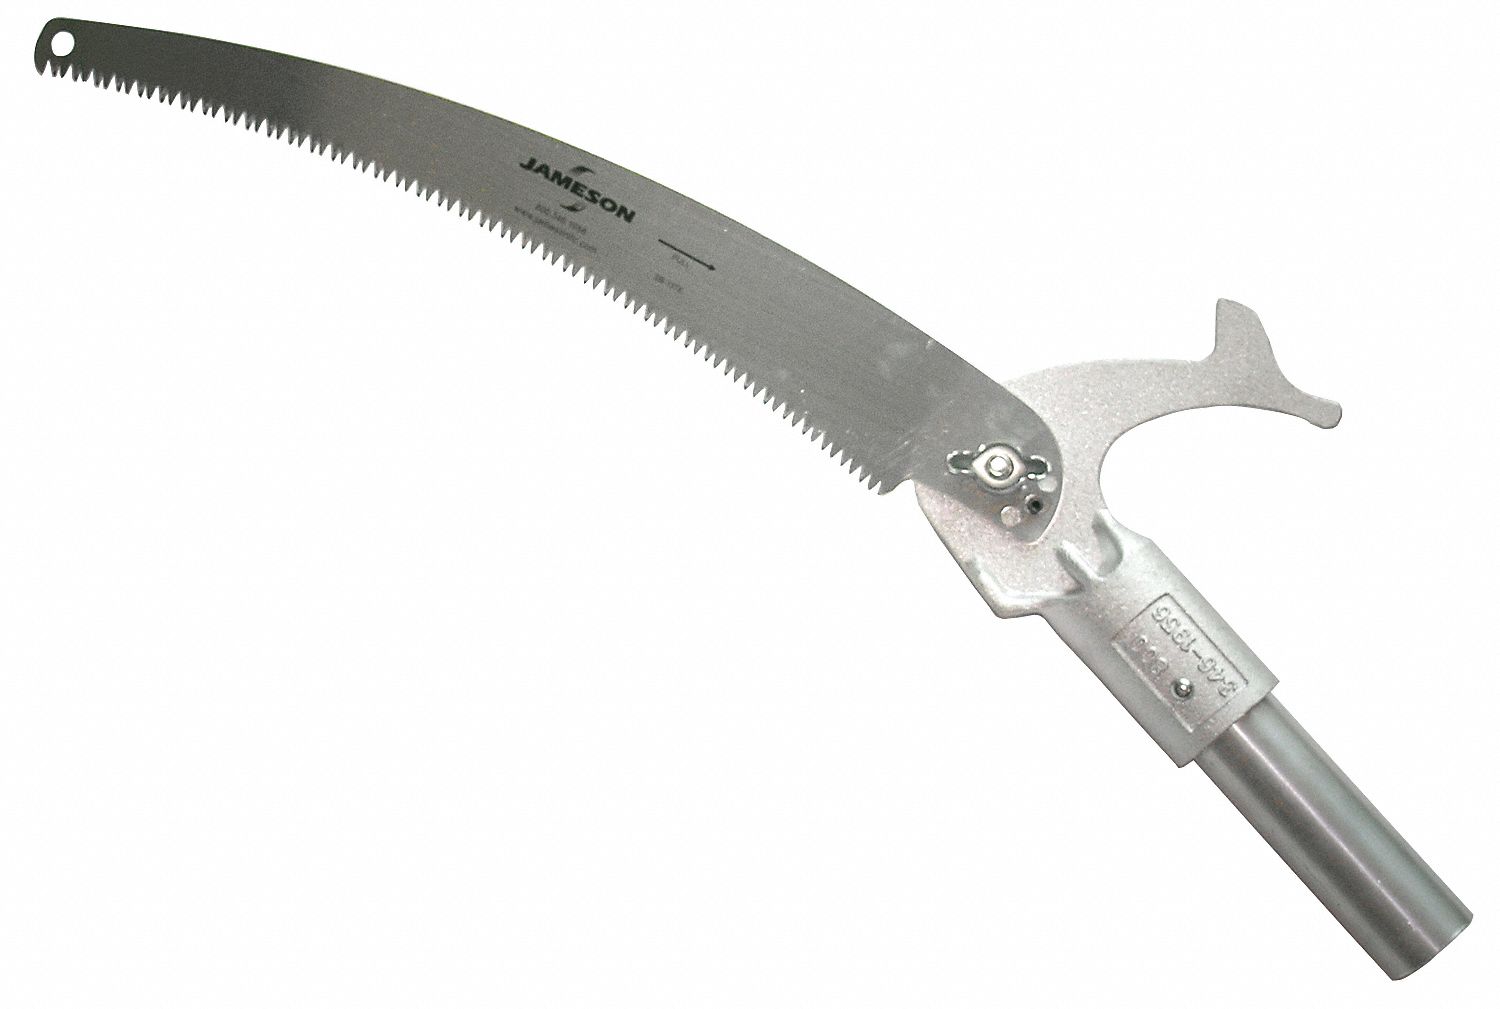 JAMESON 13" Steel Pole Saw Head and Blade - 9FEX6|PS-3FPS1 ...